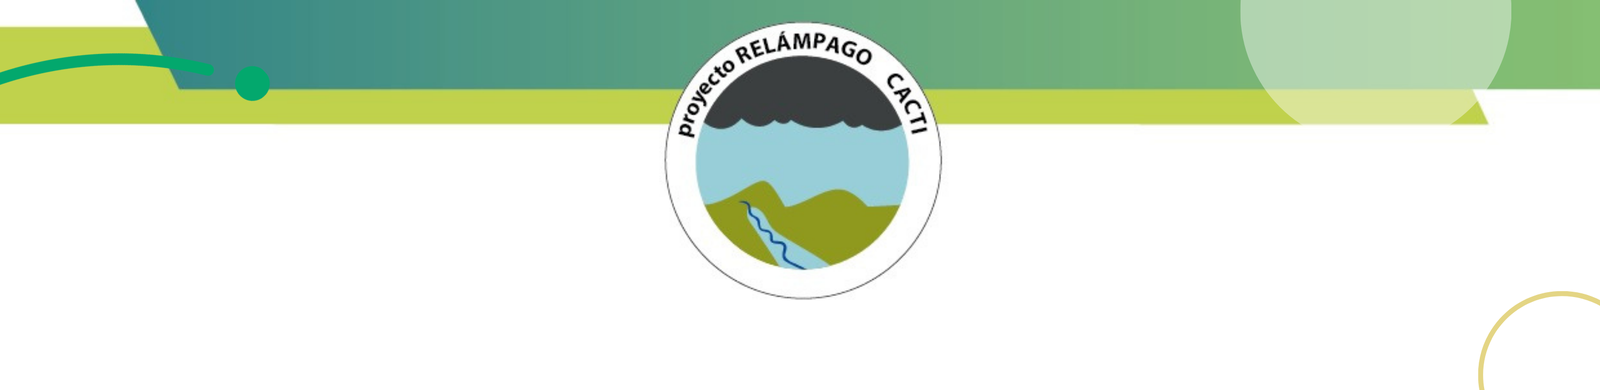 Proyecto RELAMPAGO